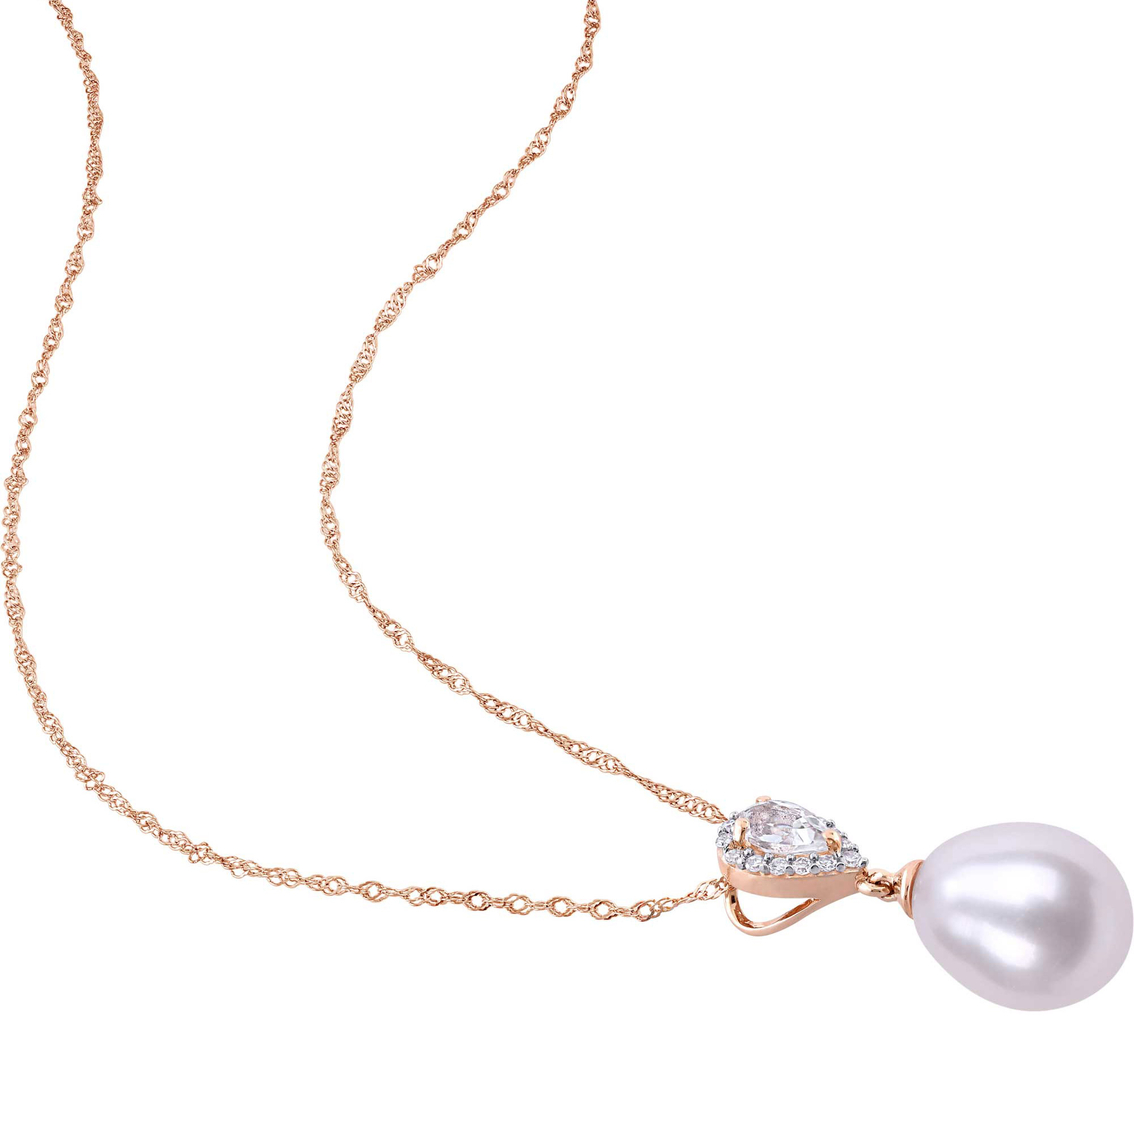 Sofia B. 10K Rose Gold Cultured Pearl White Topaz Diamond Earrings & Necklace - Image 2 of 3